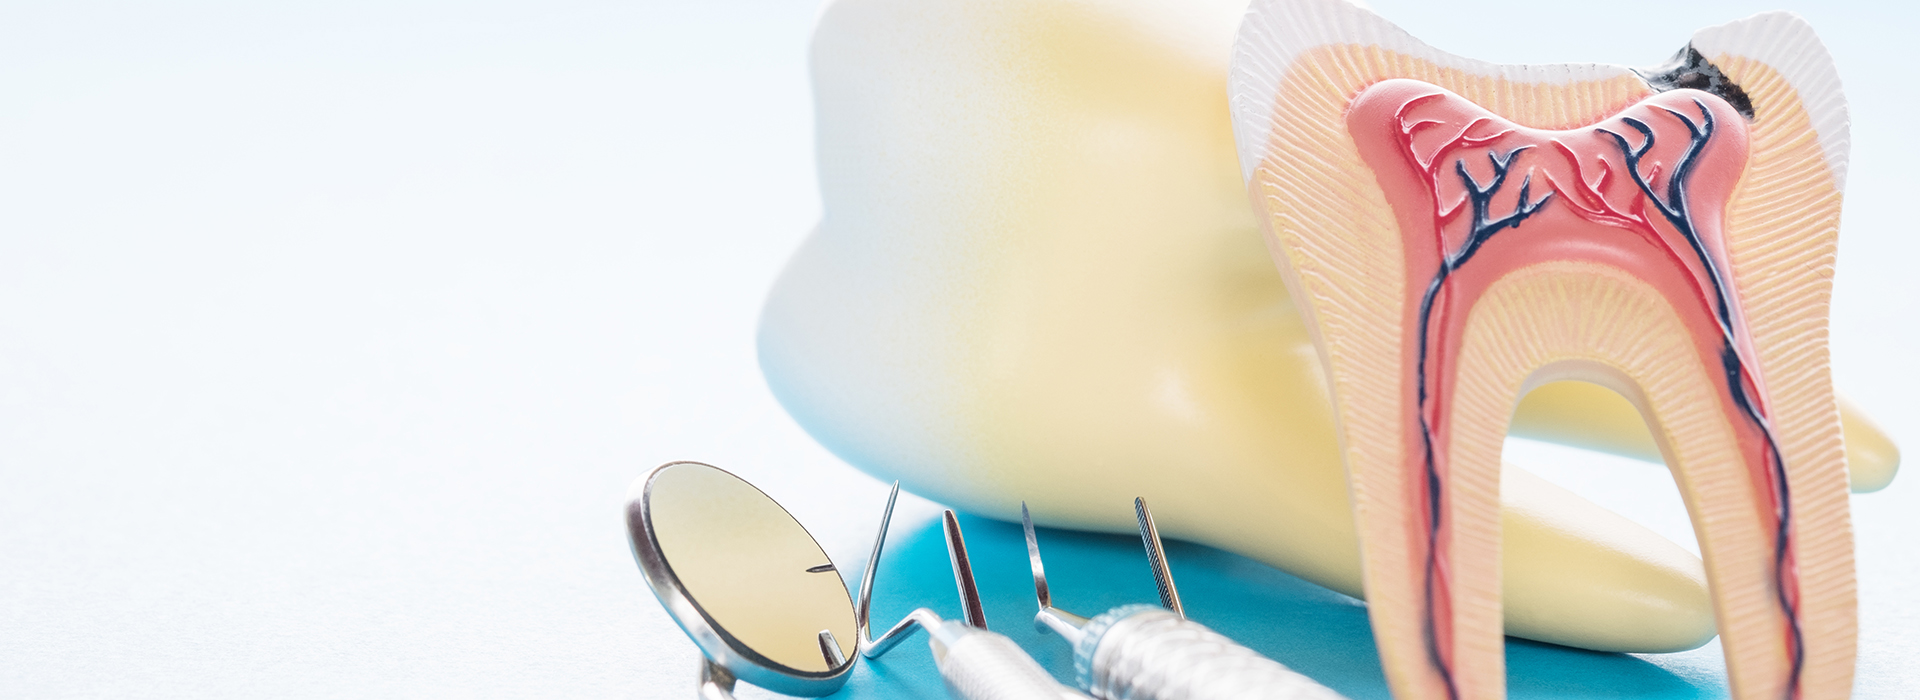 Glowing Smile Dental Studio | Cosmetic Dentistry, Root Canals and Dentures